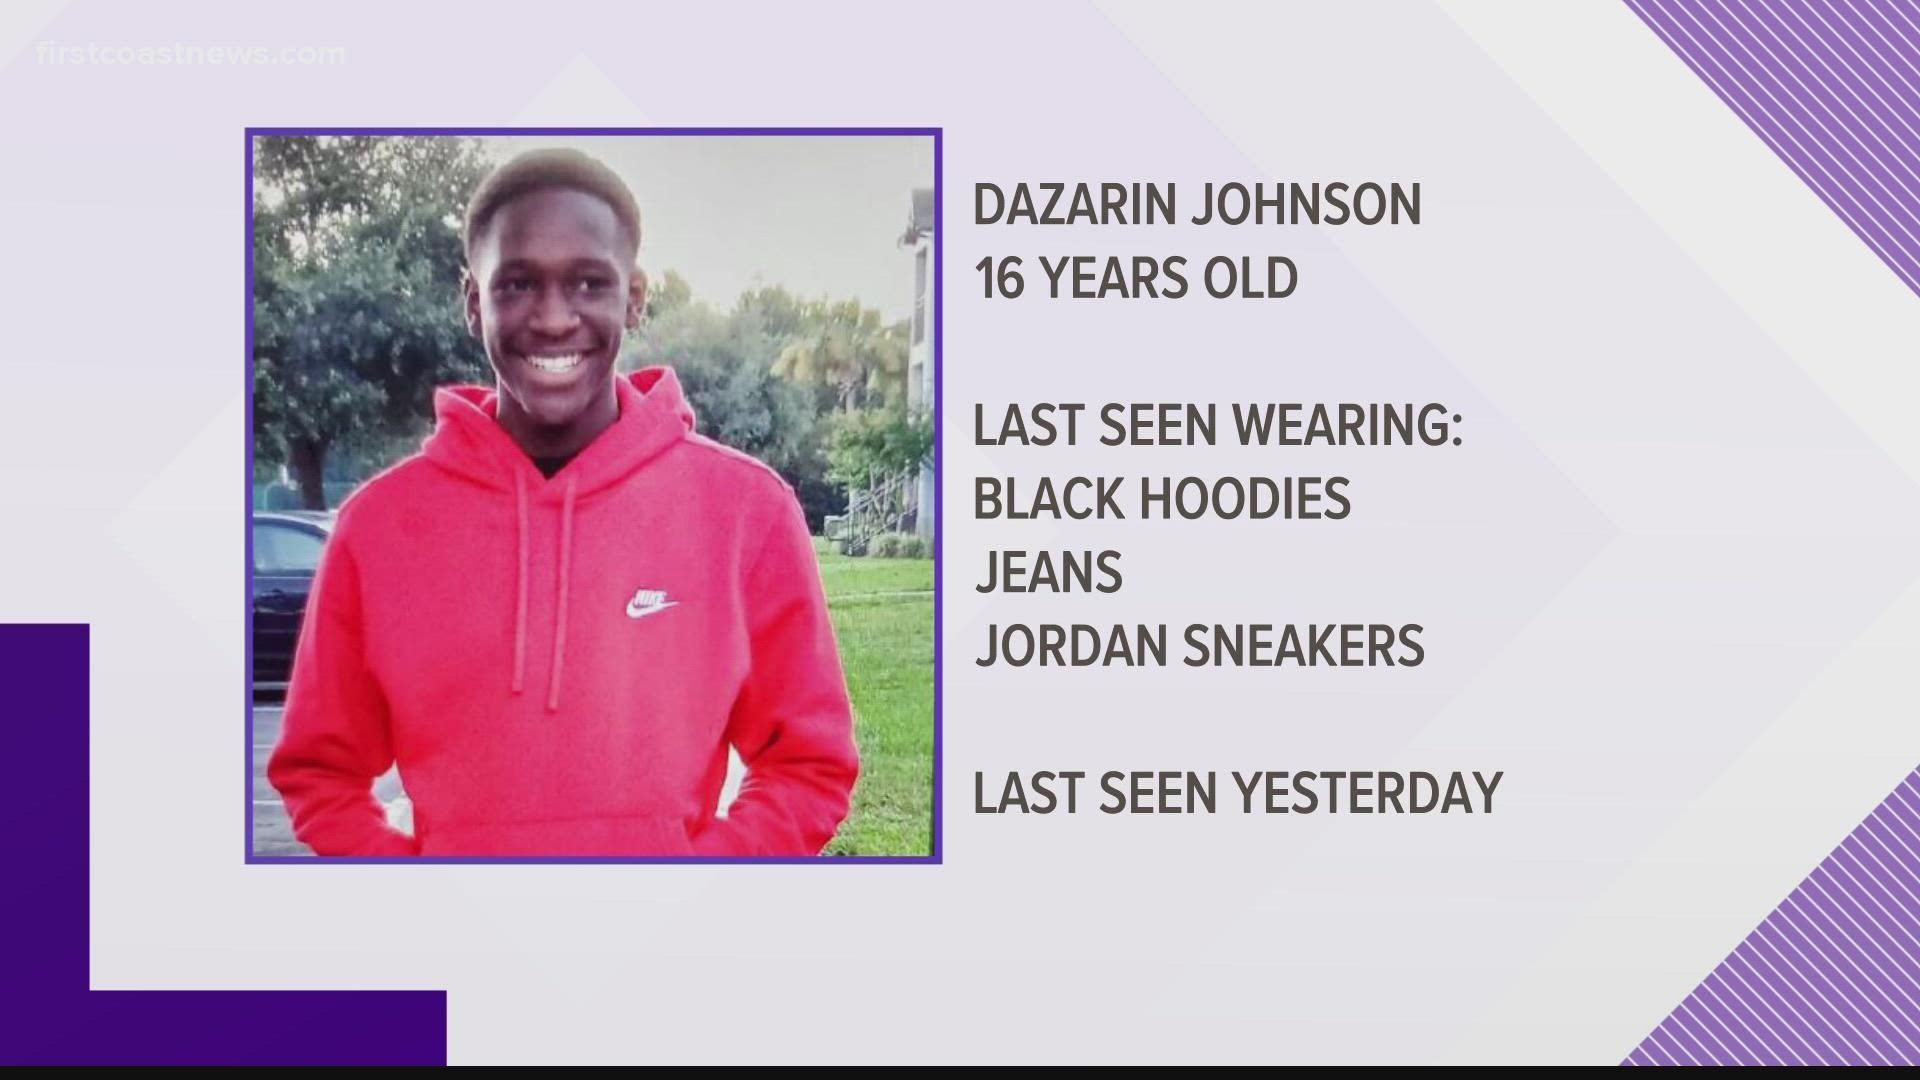 Police say Dazarin E Johnson was last seen at his residence with his mother, located at Windsong Apartments.